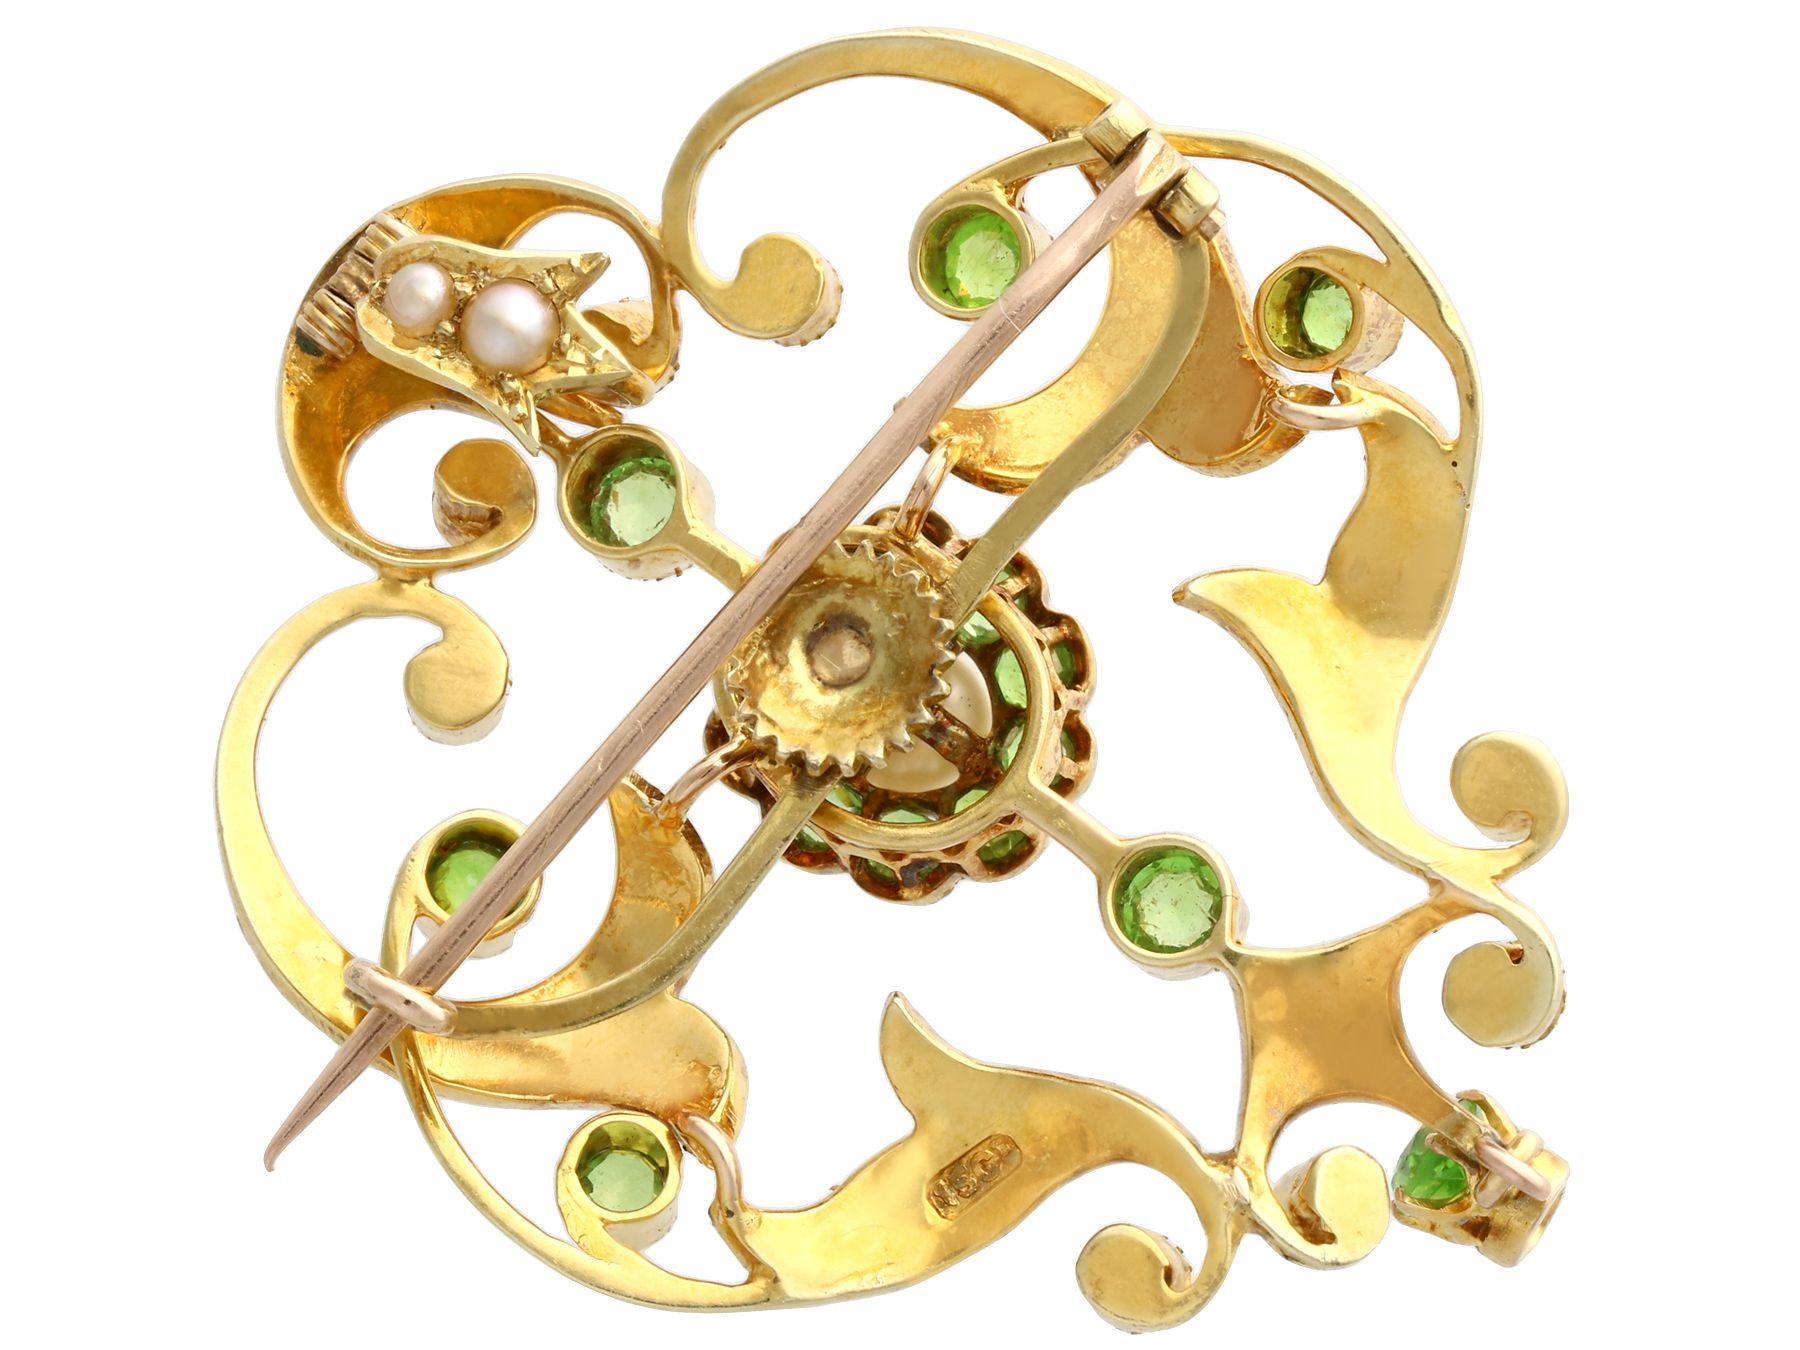 Antique 1.19 Carat Demantoid Garnet and Seed Pearl Yellow Gold Pendant Brooch In Excellent Condition For Sale In Jesmond, Newcastle Upon Tyne